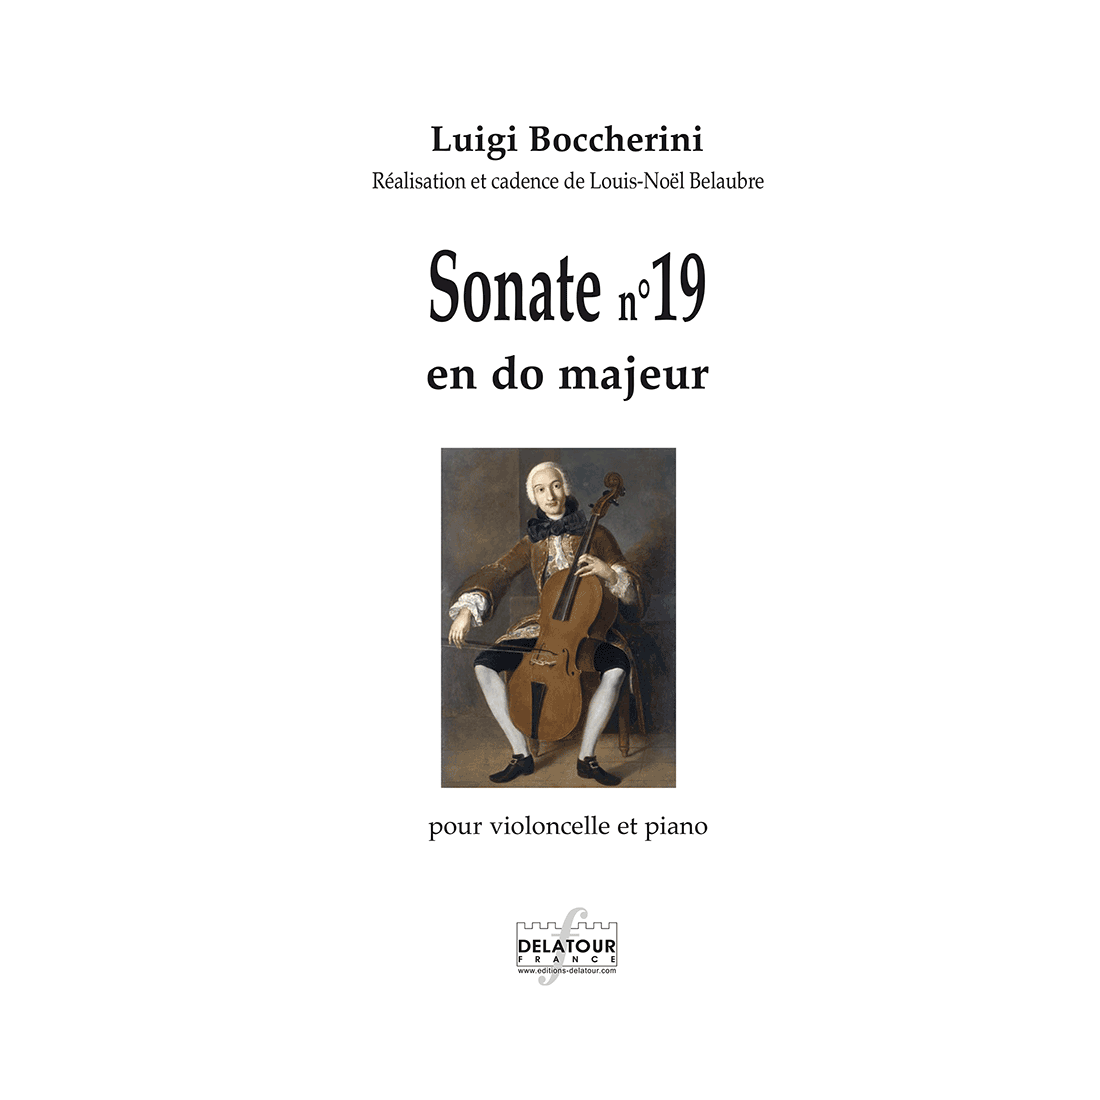 Sonate n°19 en do majeur for cello and piano